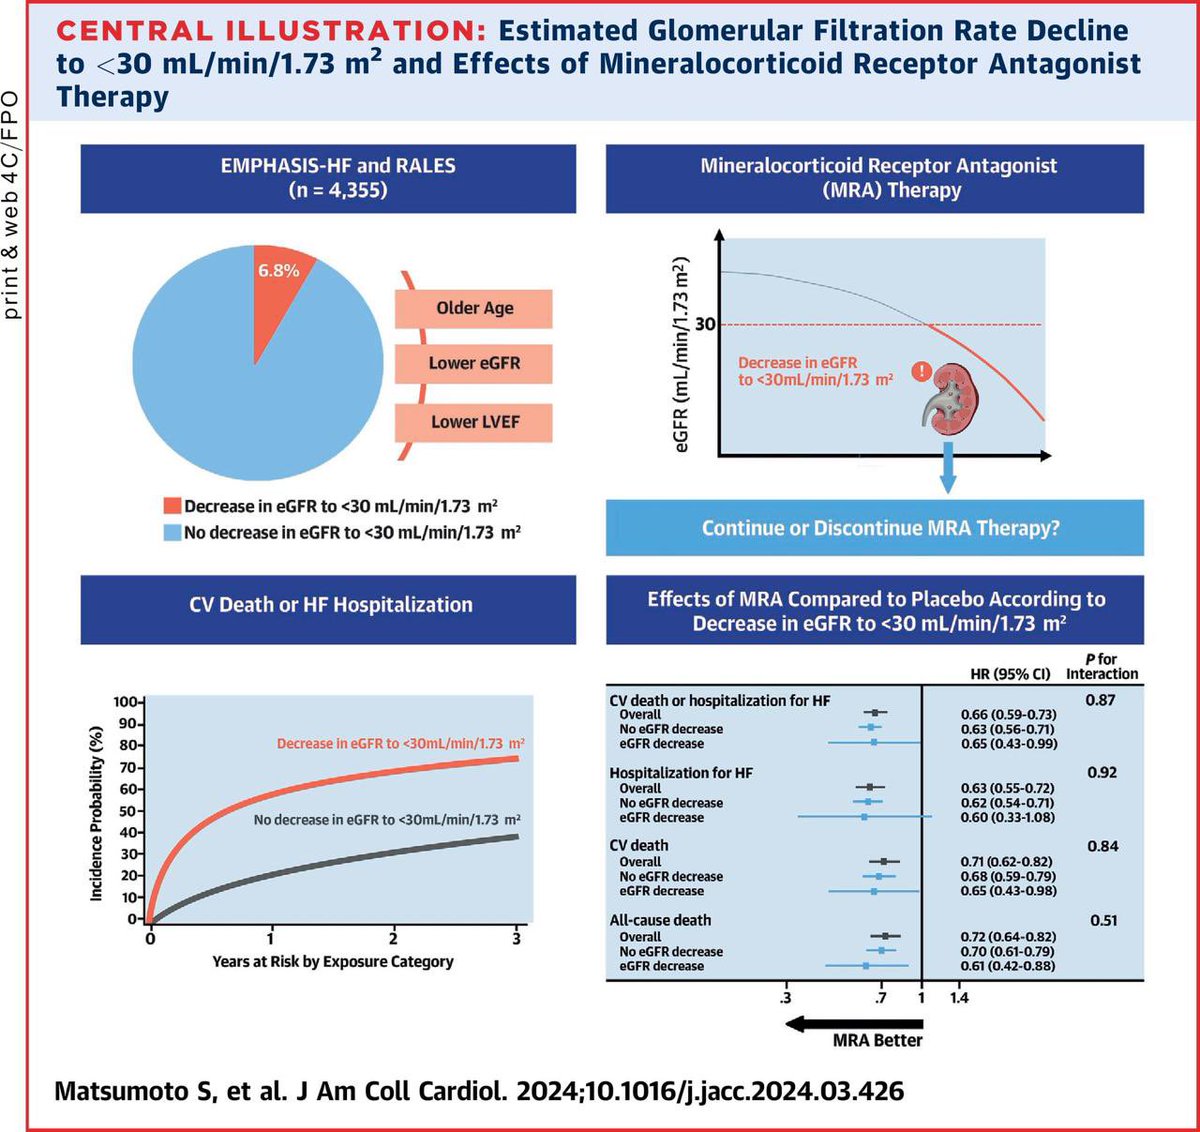 Mineralocorticoid Receptor Antagonists in Patients With Heart Failure and Impaired Renal Function decrease in eGFR to <30 mL/min/1.73 m2 are at very high risk decline in eGFR should not automatically lead to treatment discontinuation. jacc.org/doi/10.1016/j.…